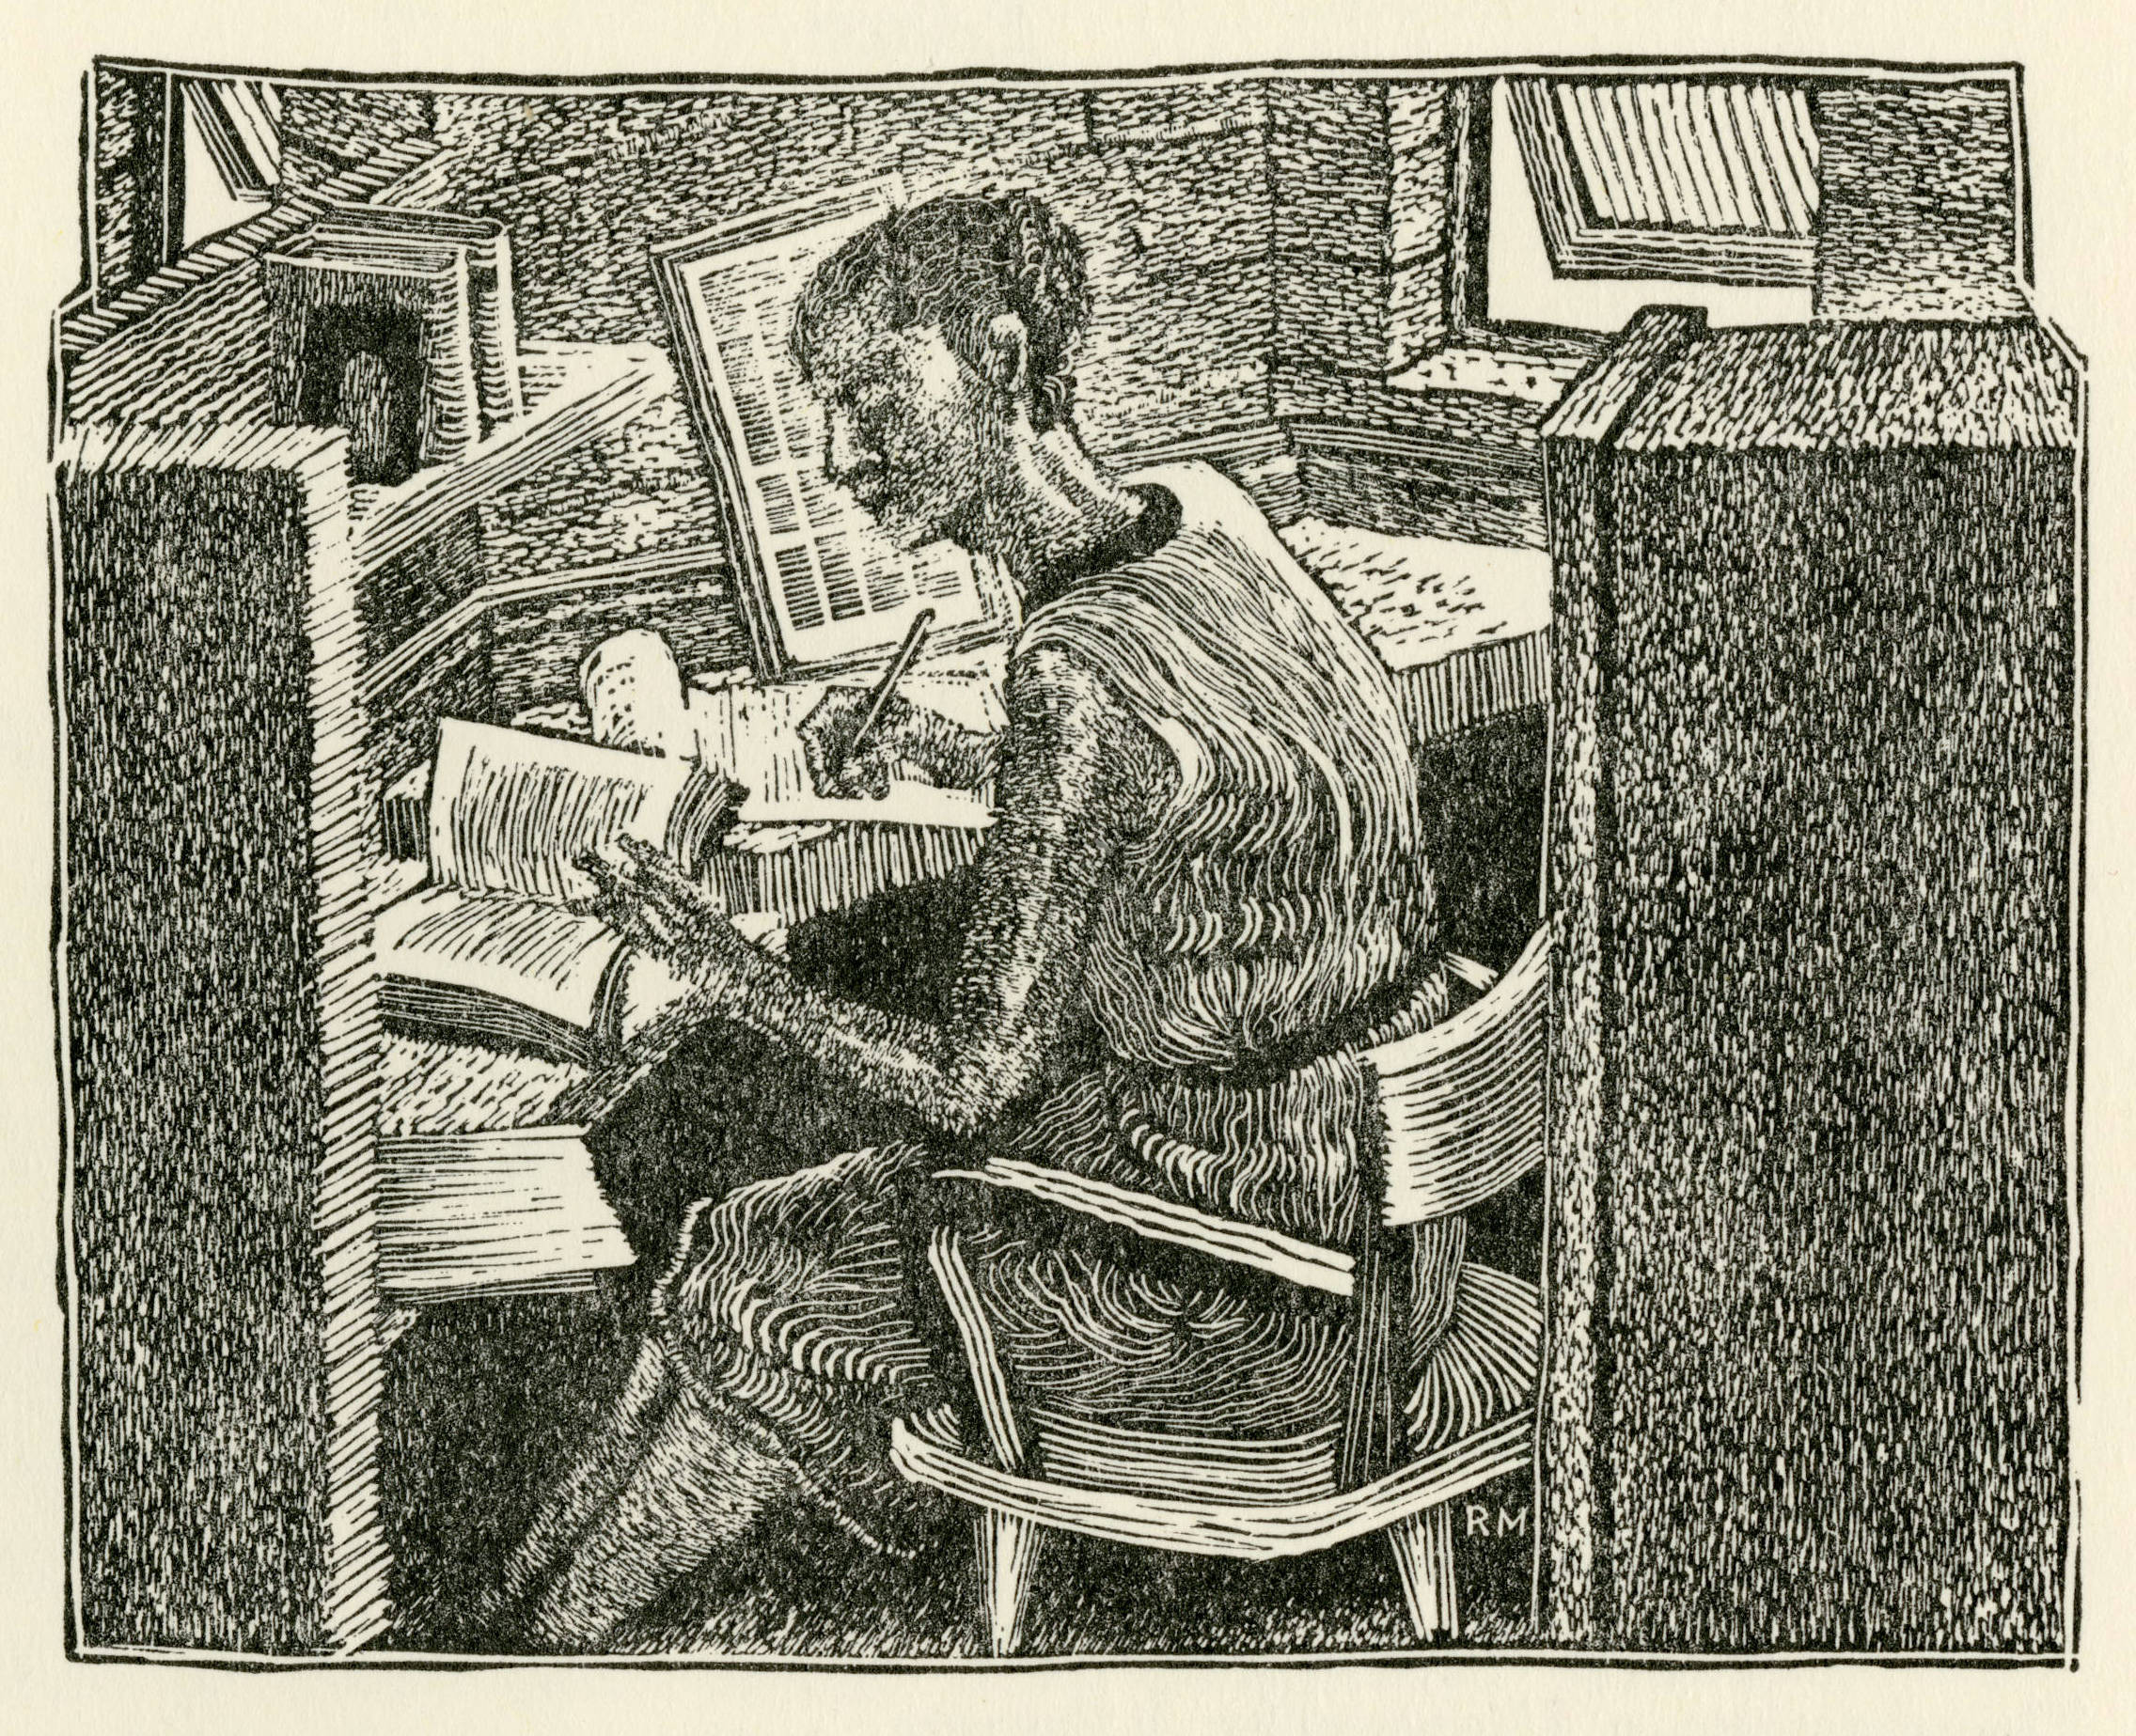 etching of woman at a desk with books; black ink on cream colored paper